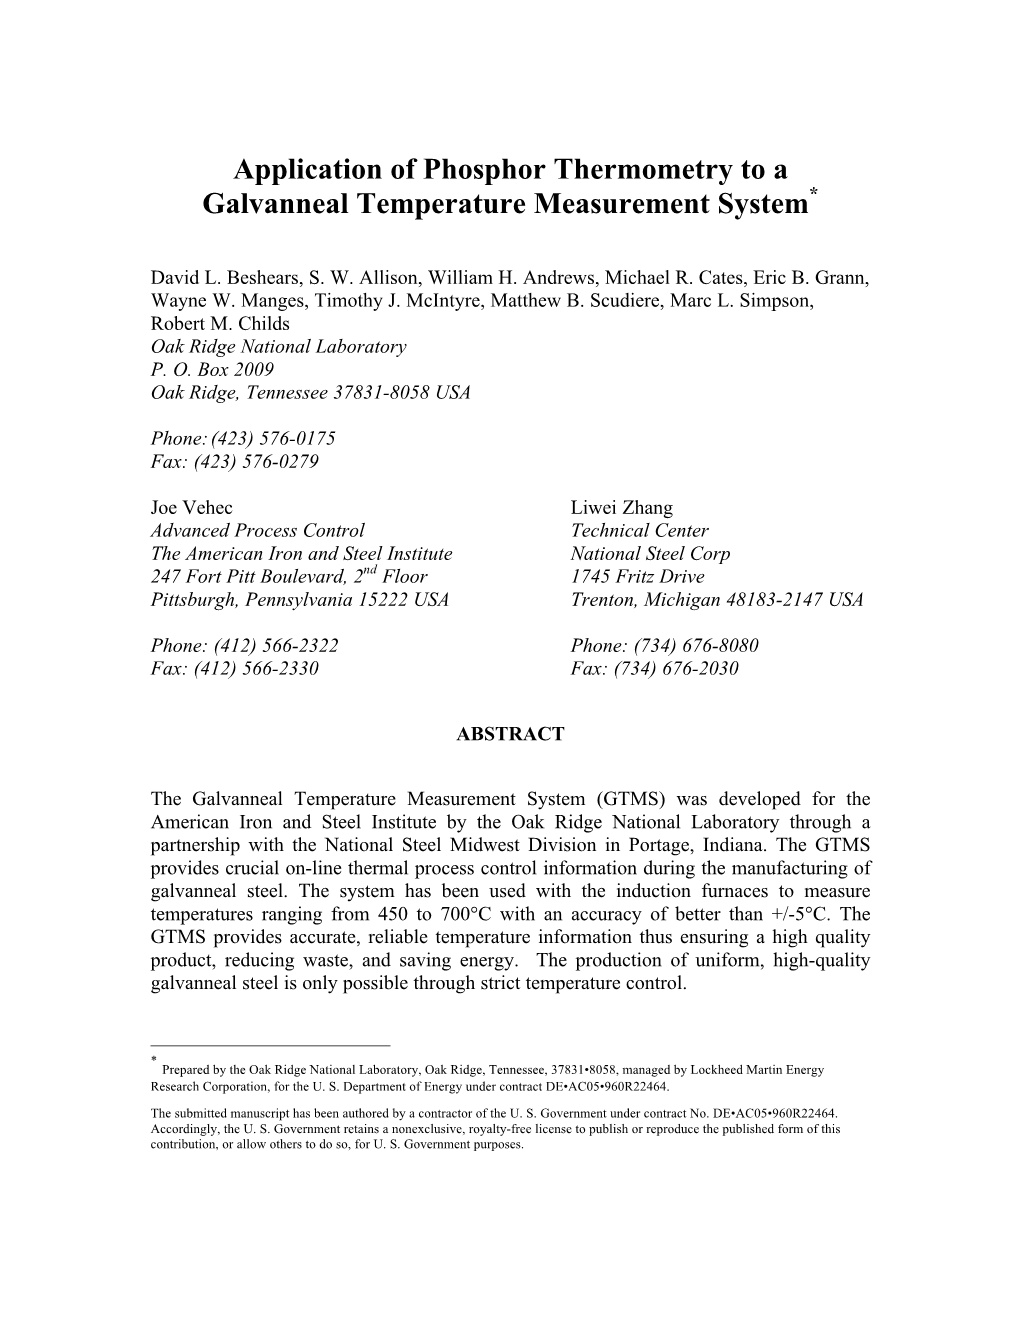 Application of Phosphor Thermometry to a Galvanneal Temperature Measurement System*